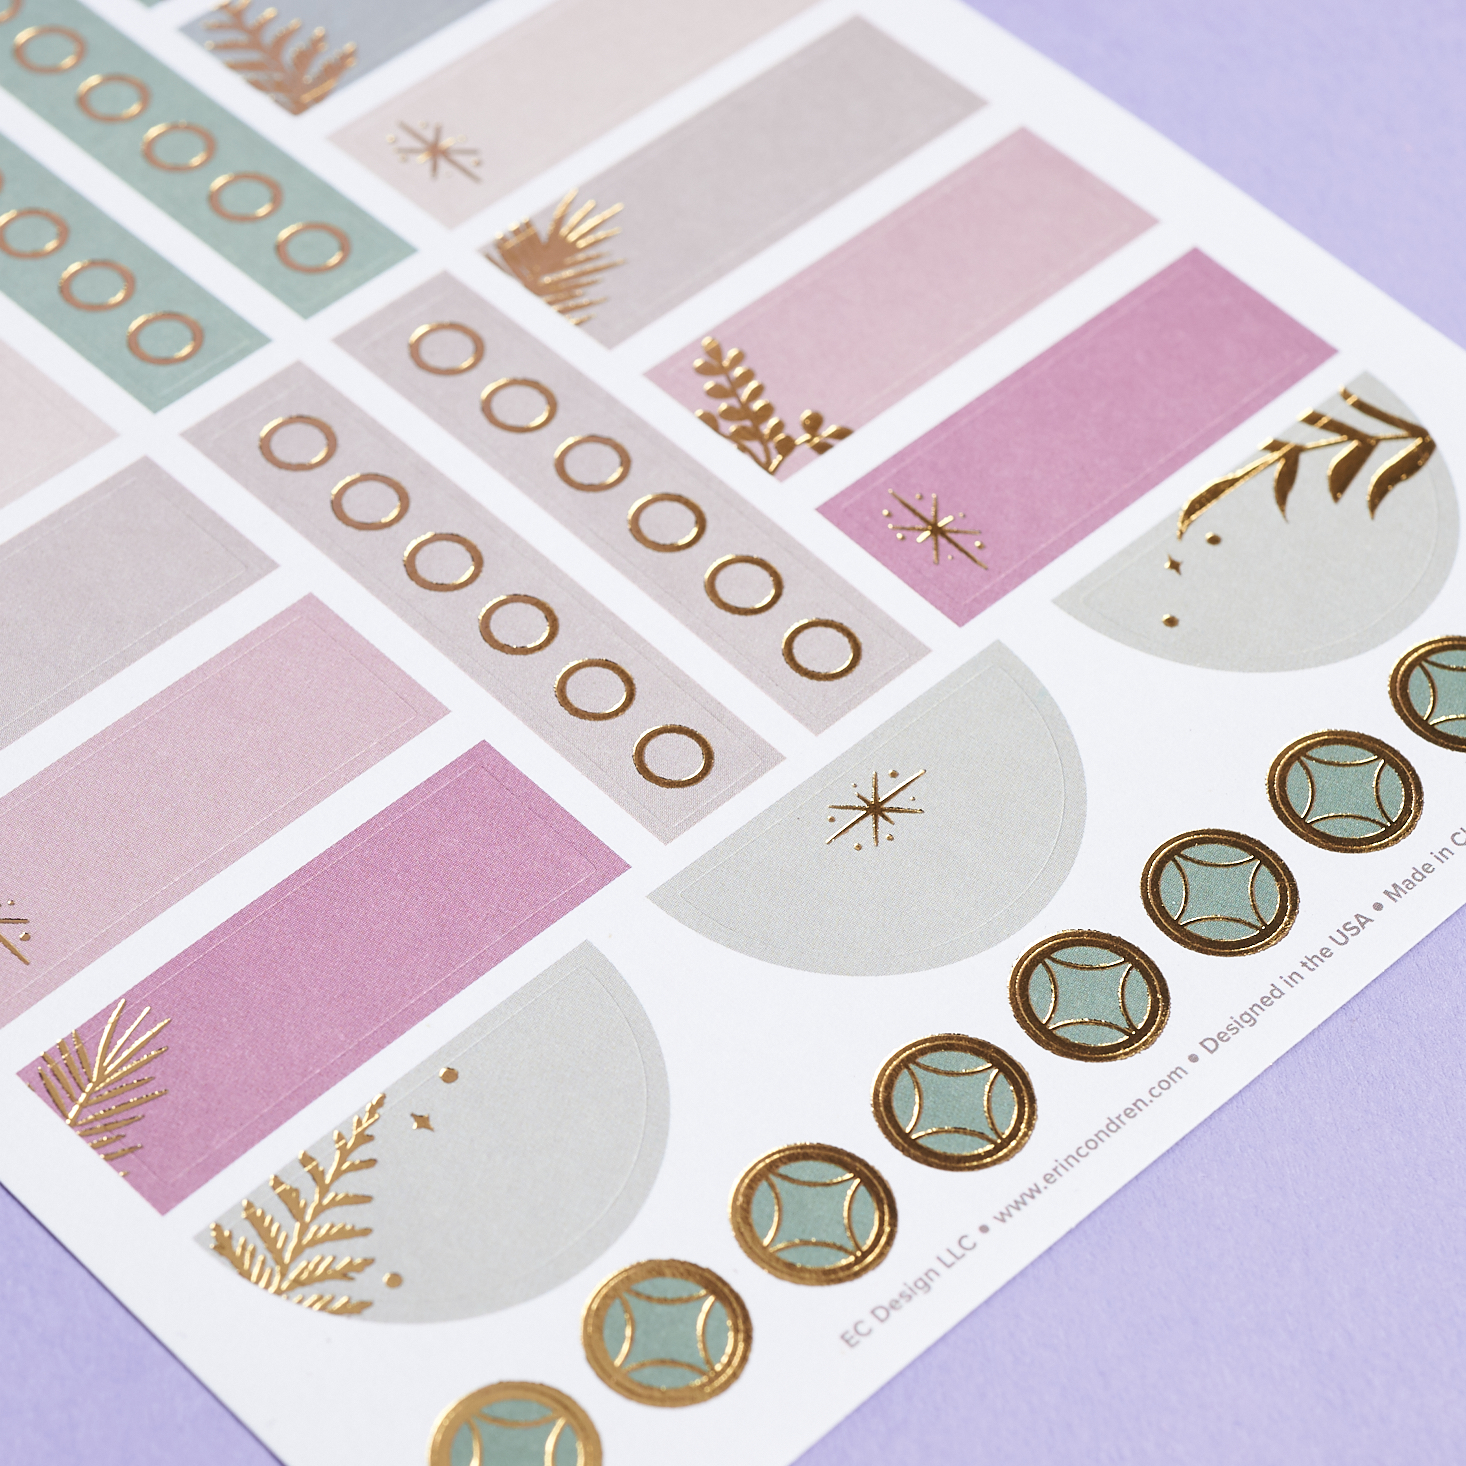 Erin Condren fall stickers functional close up